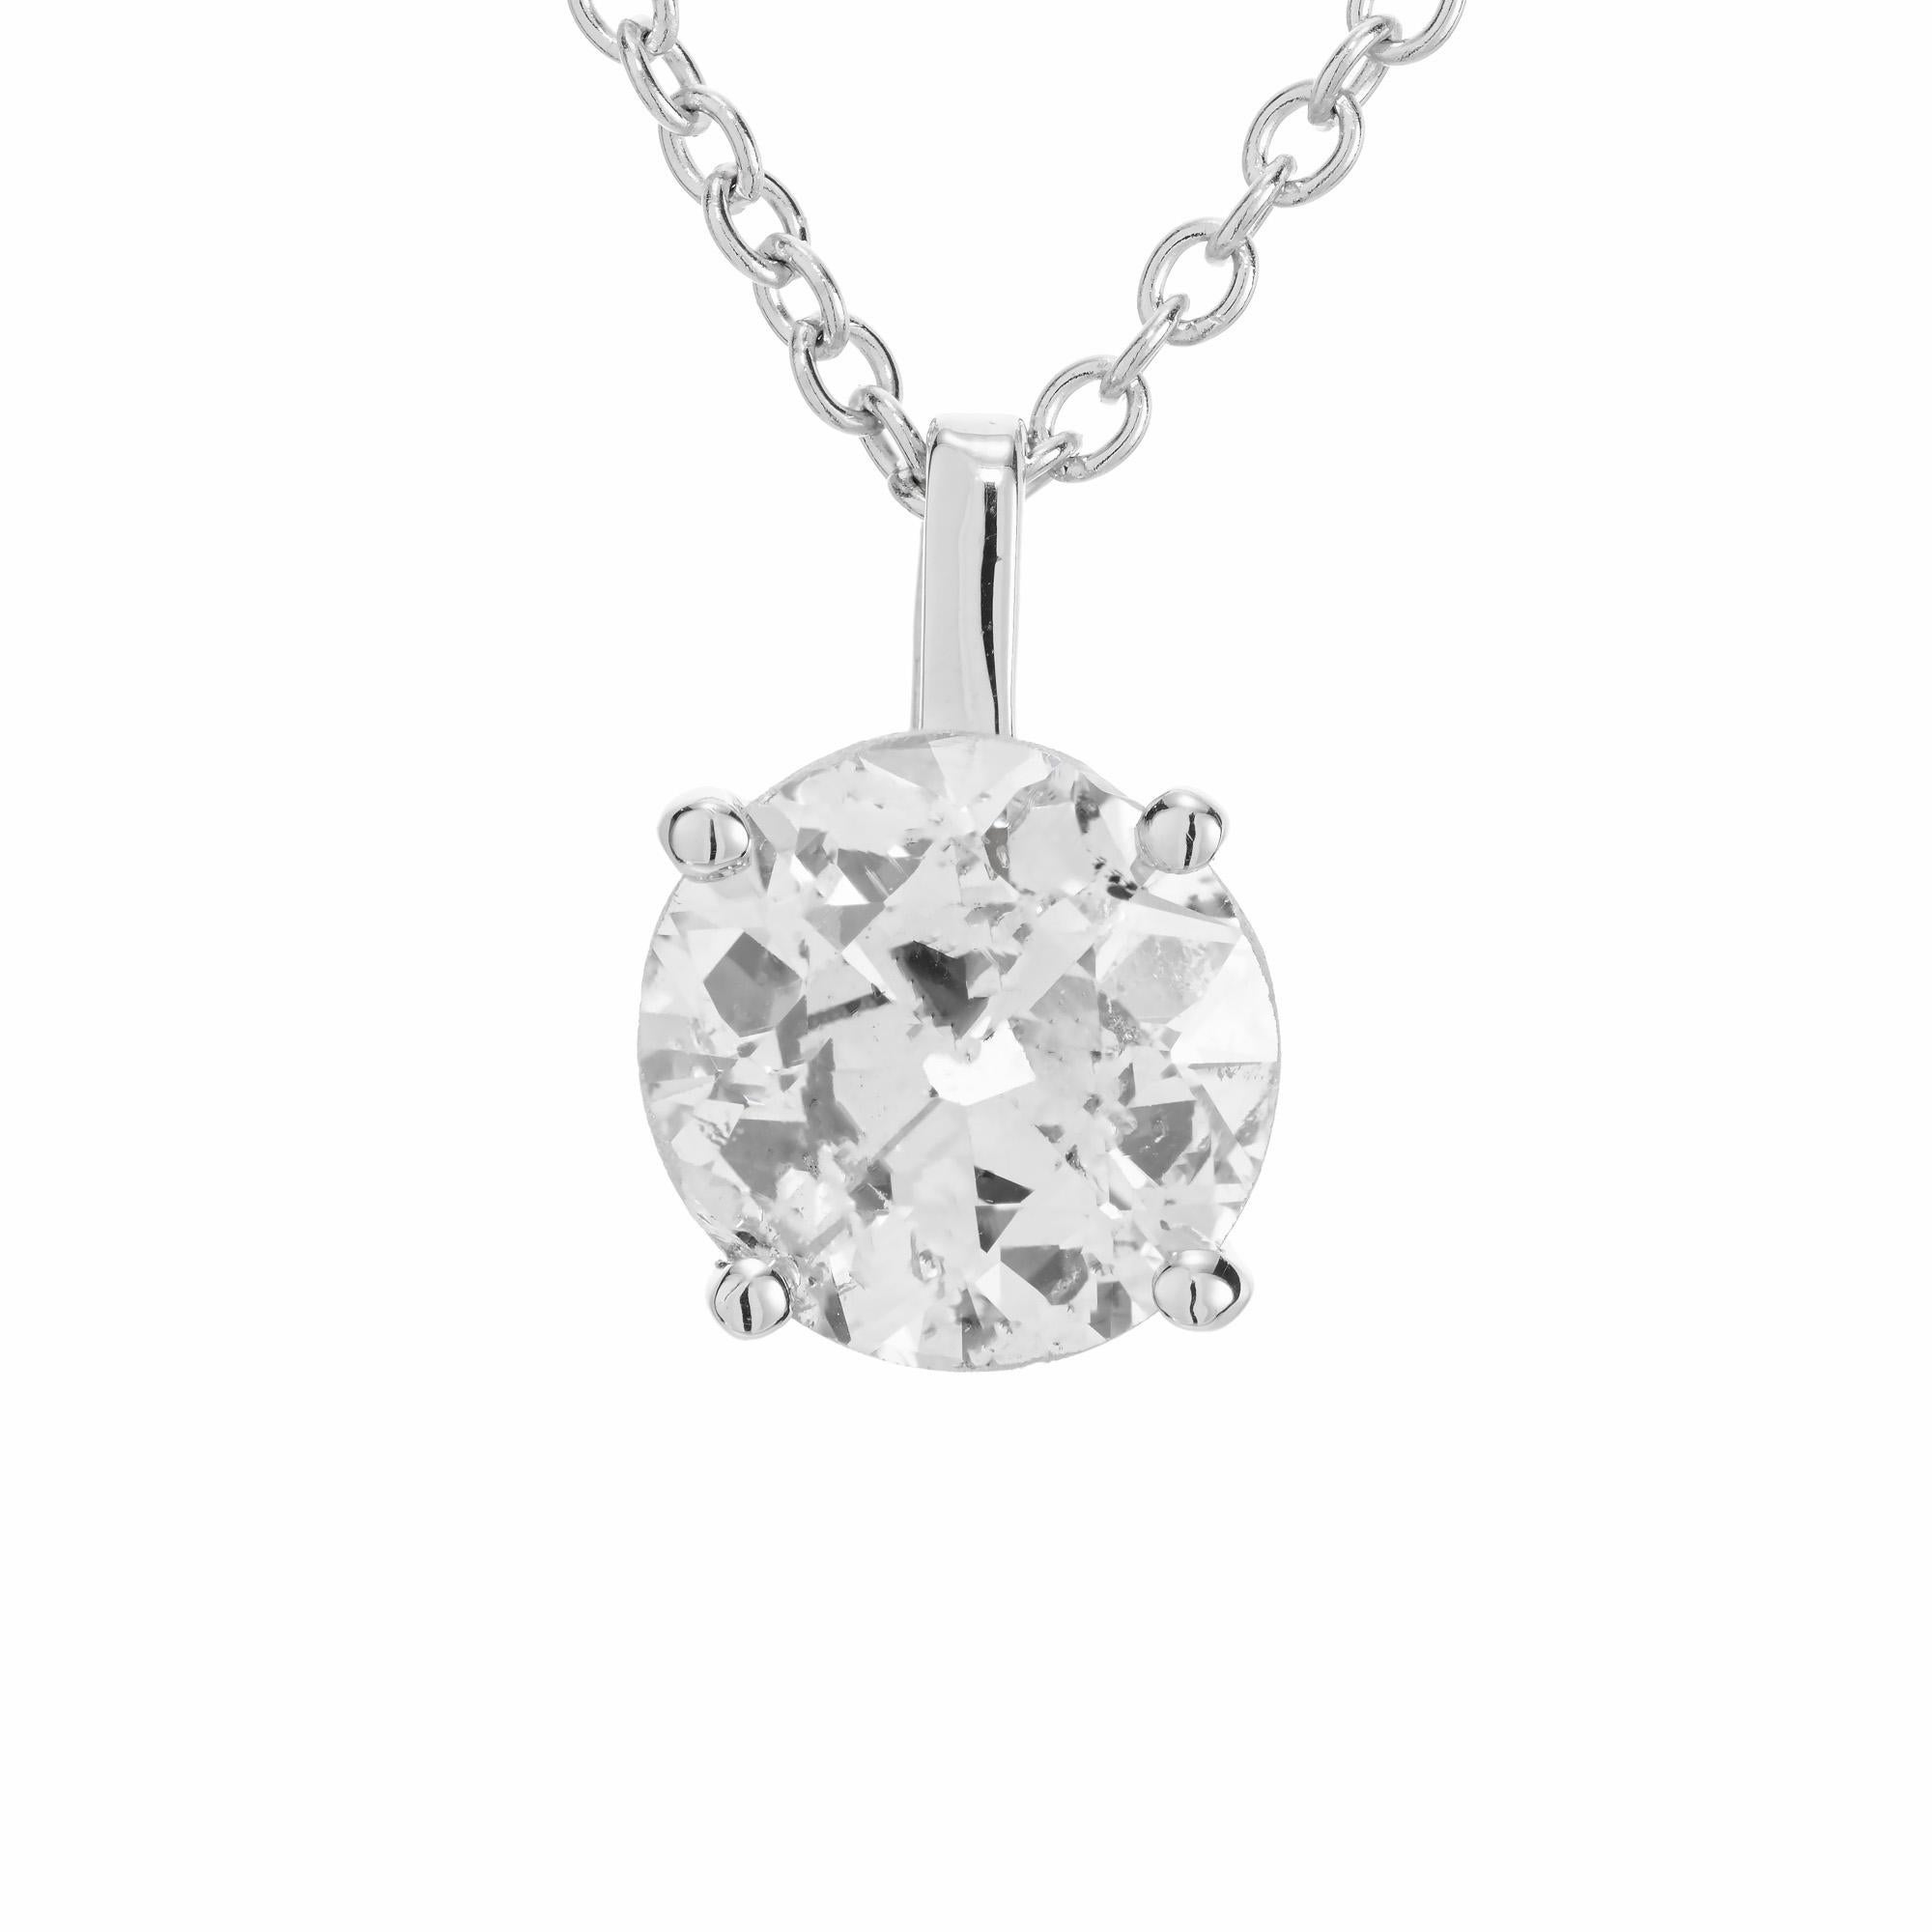 Diamond pendant necklace. Old European cut diamond set in a 14k white gold basket pendant setting. 14k white gold 16 inch chain. Designed and crafted in the Peter Suchy workshop.

1 old European cut diamond, F-G I approx. .76cts EGL Certificate #